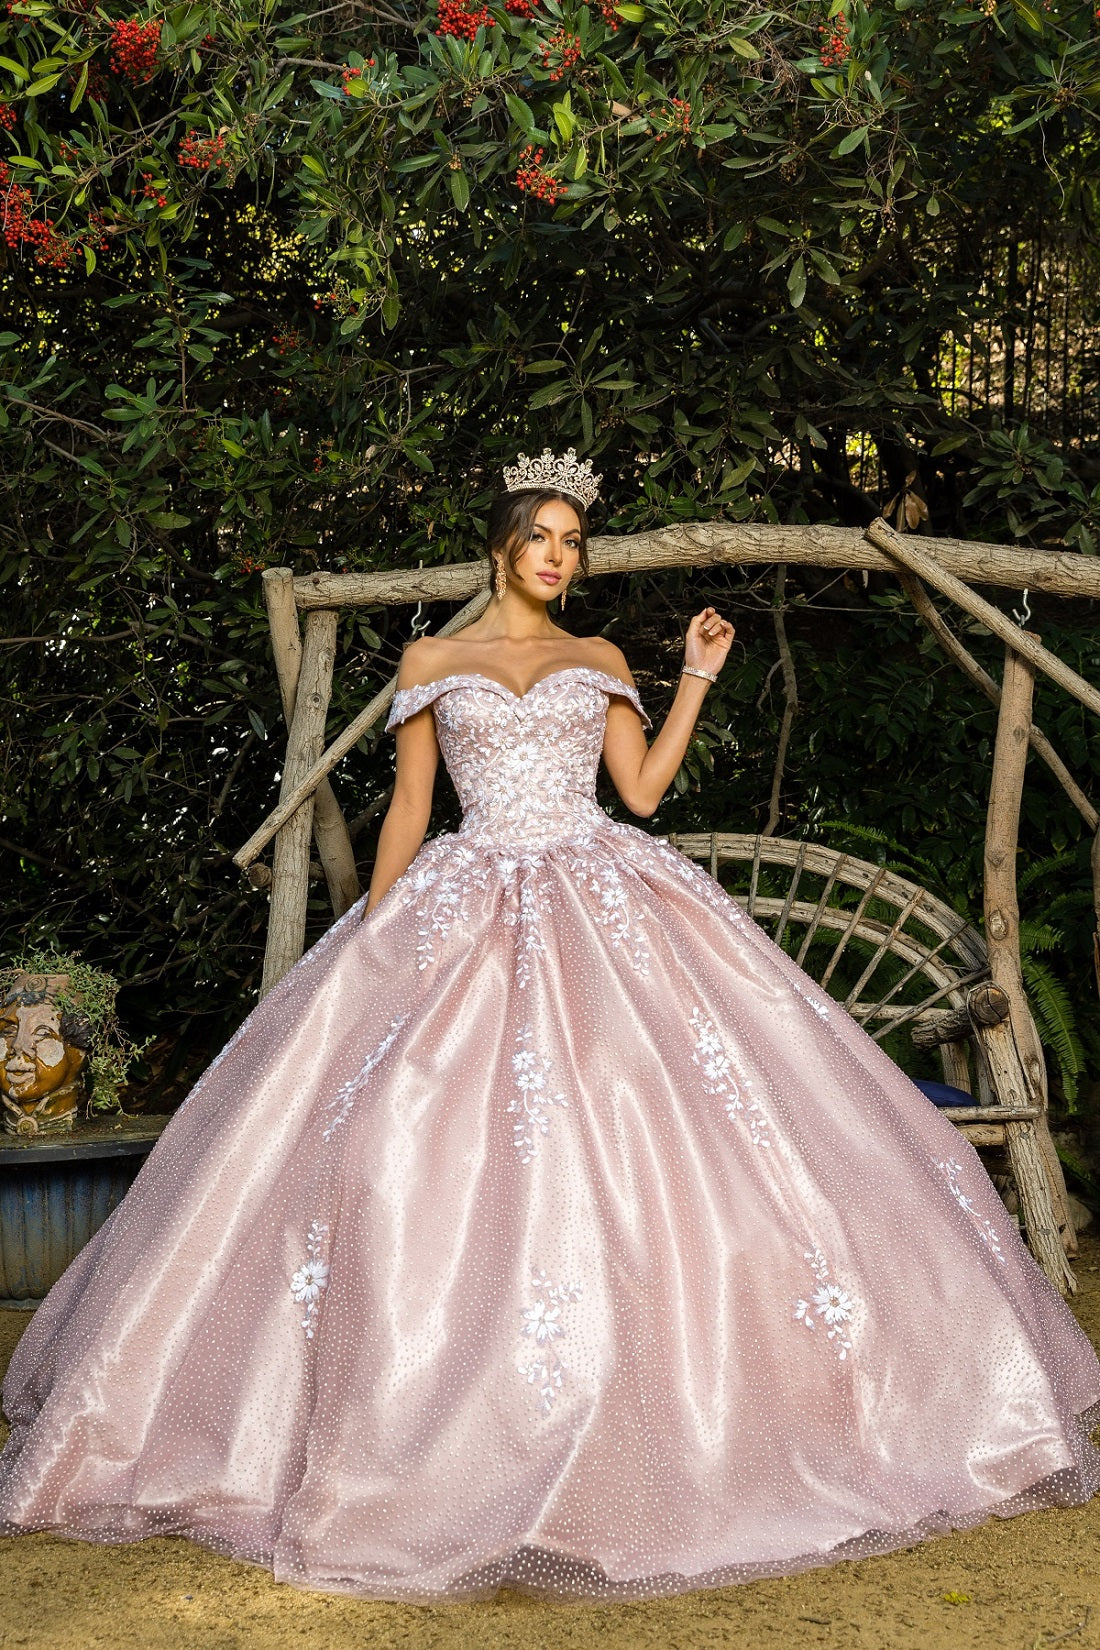 Elegant Lace Off Shoulder Sweetheart Embossed Tulle Satin Quinceanera Dress CU8060J Elsy Style Quinceanera